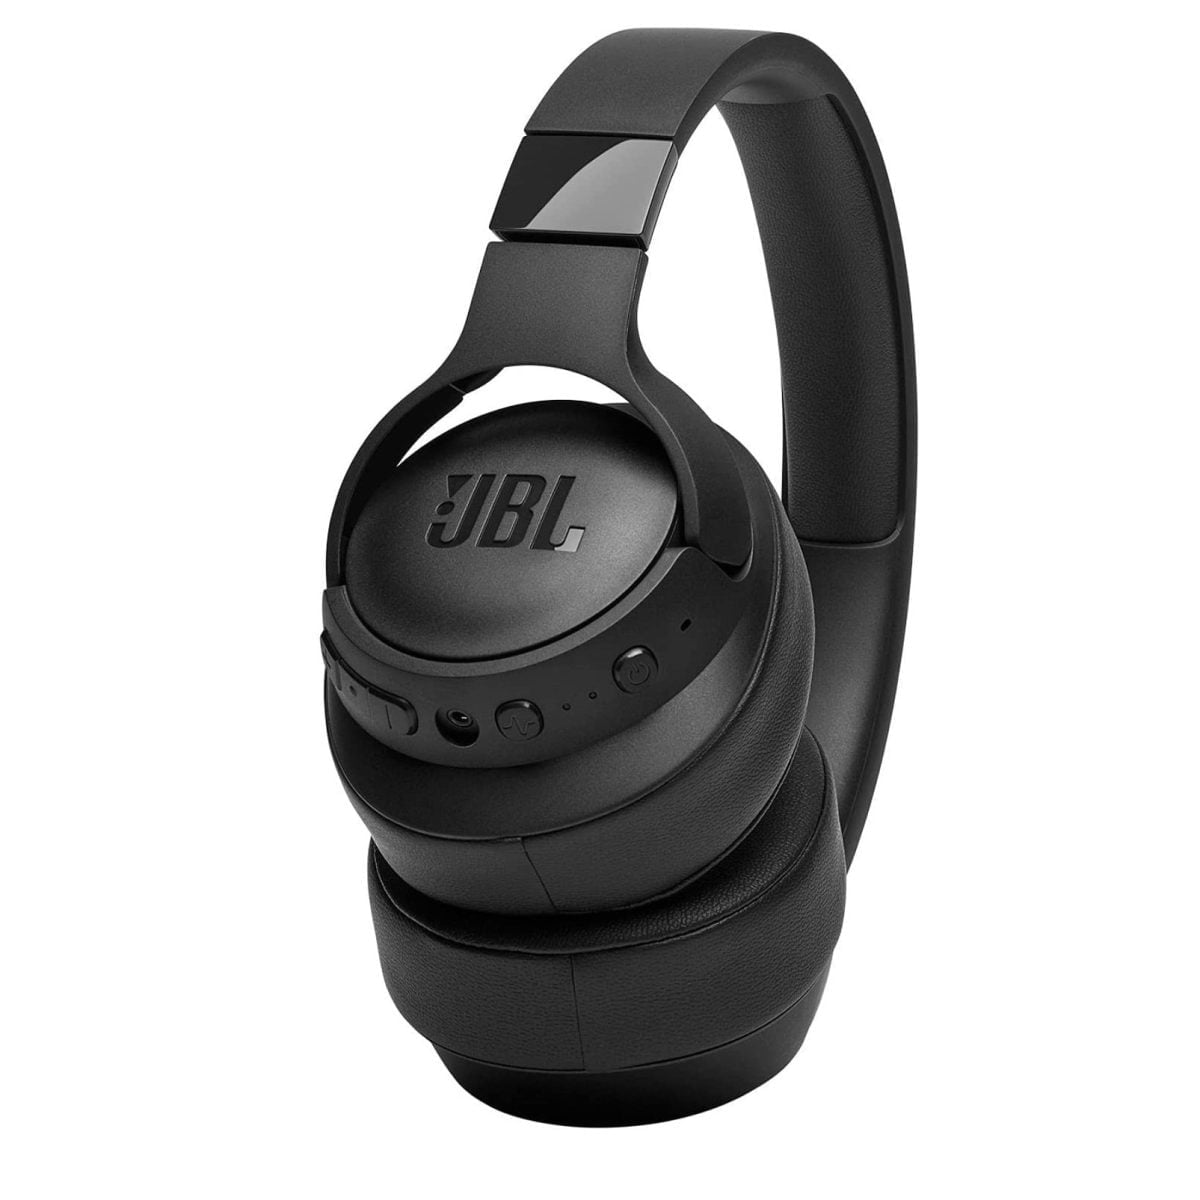 61Xyv6Nfdml. Ac Sl1500 Jbl &Lt;H1&Gt;Jbl Tune 750Btnc Wireless Noise Cancelling Headphones - Black&Lt;/H1&Gt; Https://Www.youtube.com/Watch?V=3Nvhiwevpho Jbl Tune 750Btnc Wireless Headphones Feature Powerful Jbl Pure Bass Sound And Active Noise-Cancelling For Punchy Bass And An Immersive Audio Experience. The Lightweight Over-Ear Design Offers Maximum Comfort And Sound Quality While Ready To Travel Everywhere You Go With Its Compact Foldable Competence. Up To 15 Hours Of Battery Life Which Recharge In Only 2 Hours Enables Noise-Free, Wireless Playback. Jbl Wireless Headphones Jbl Tune 750Btnc Wireless Noise Cancelling Headphones - Black